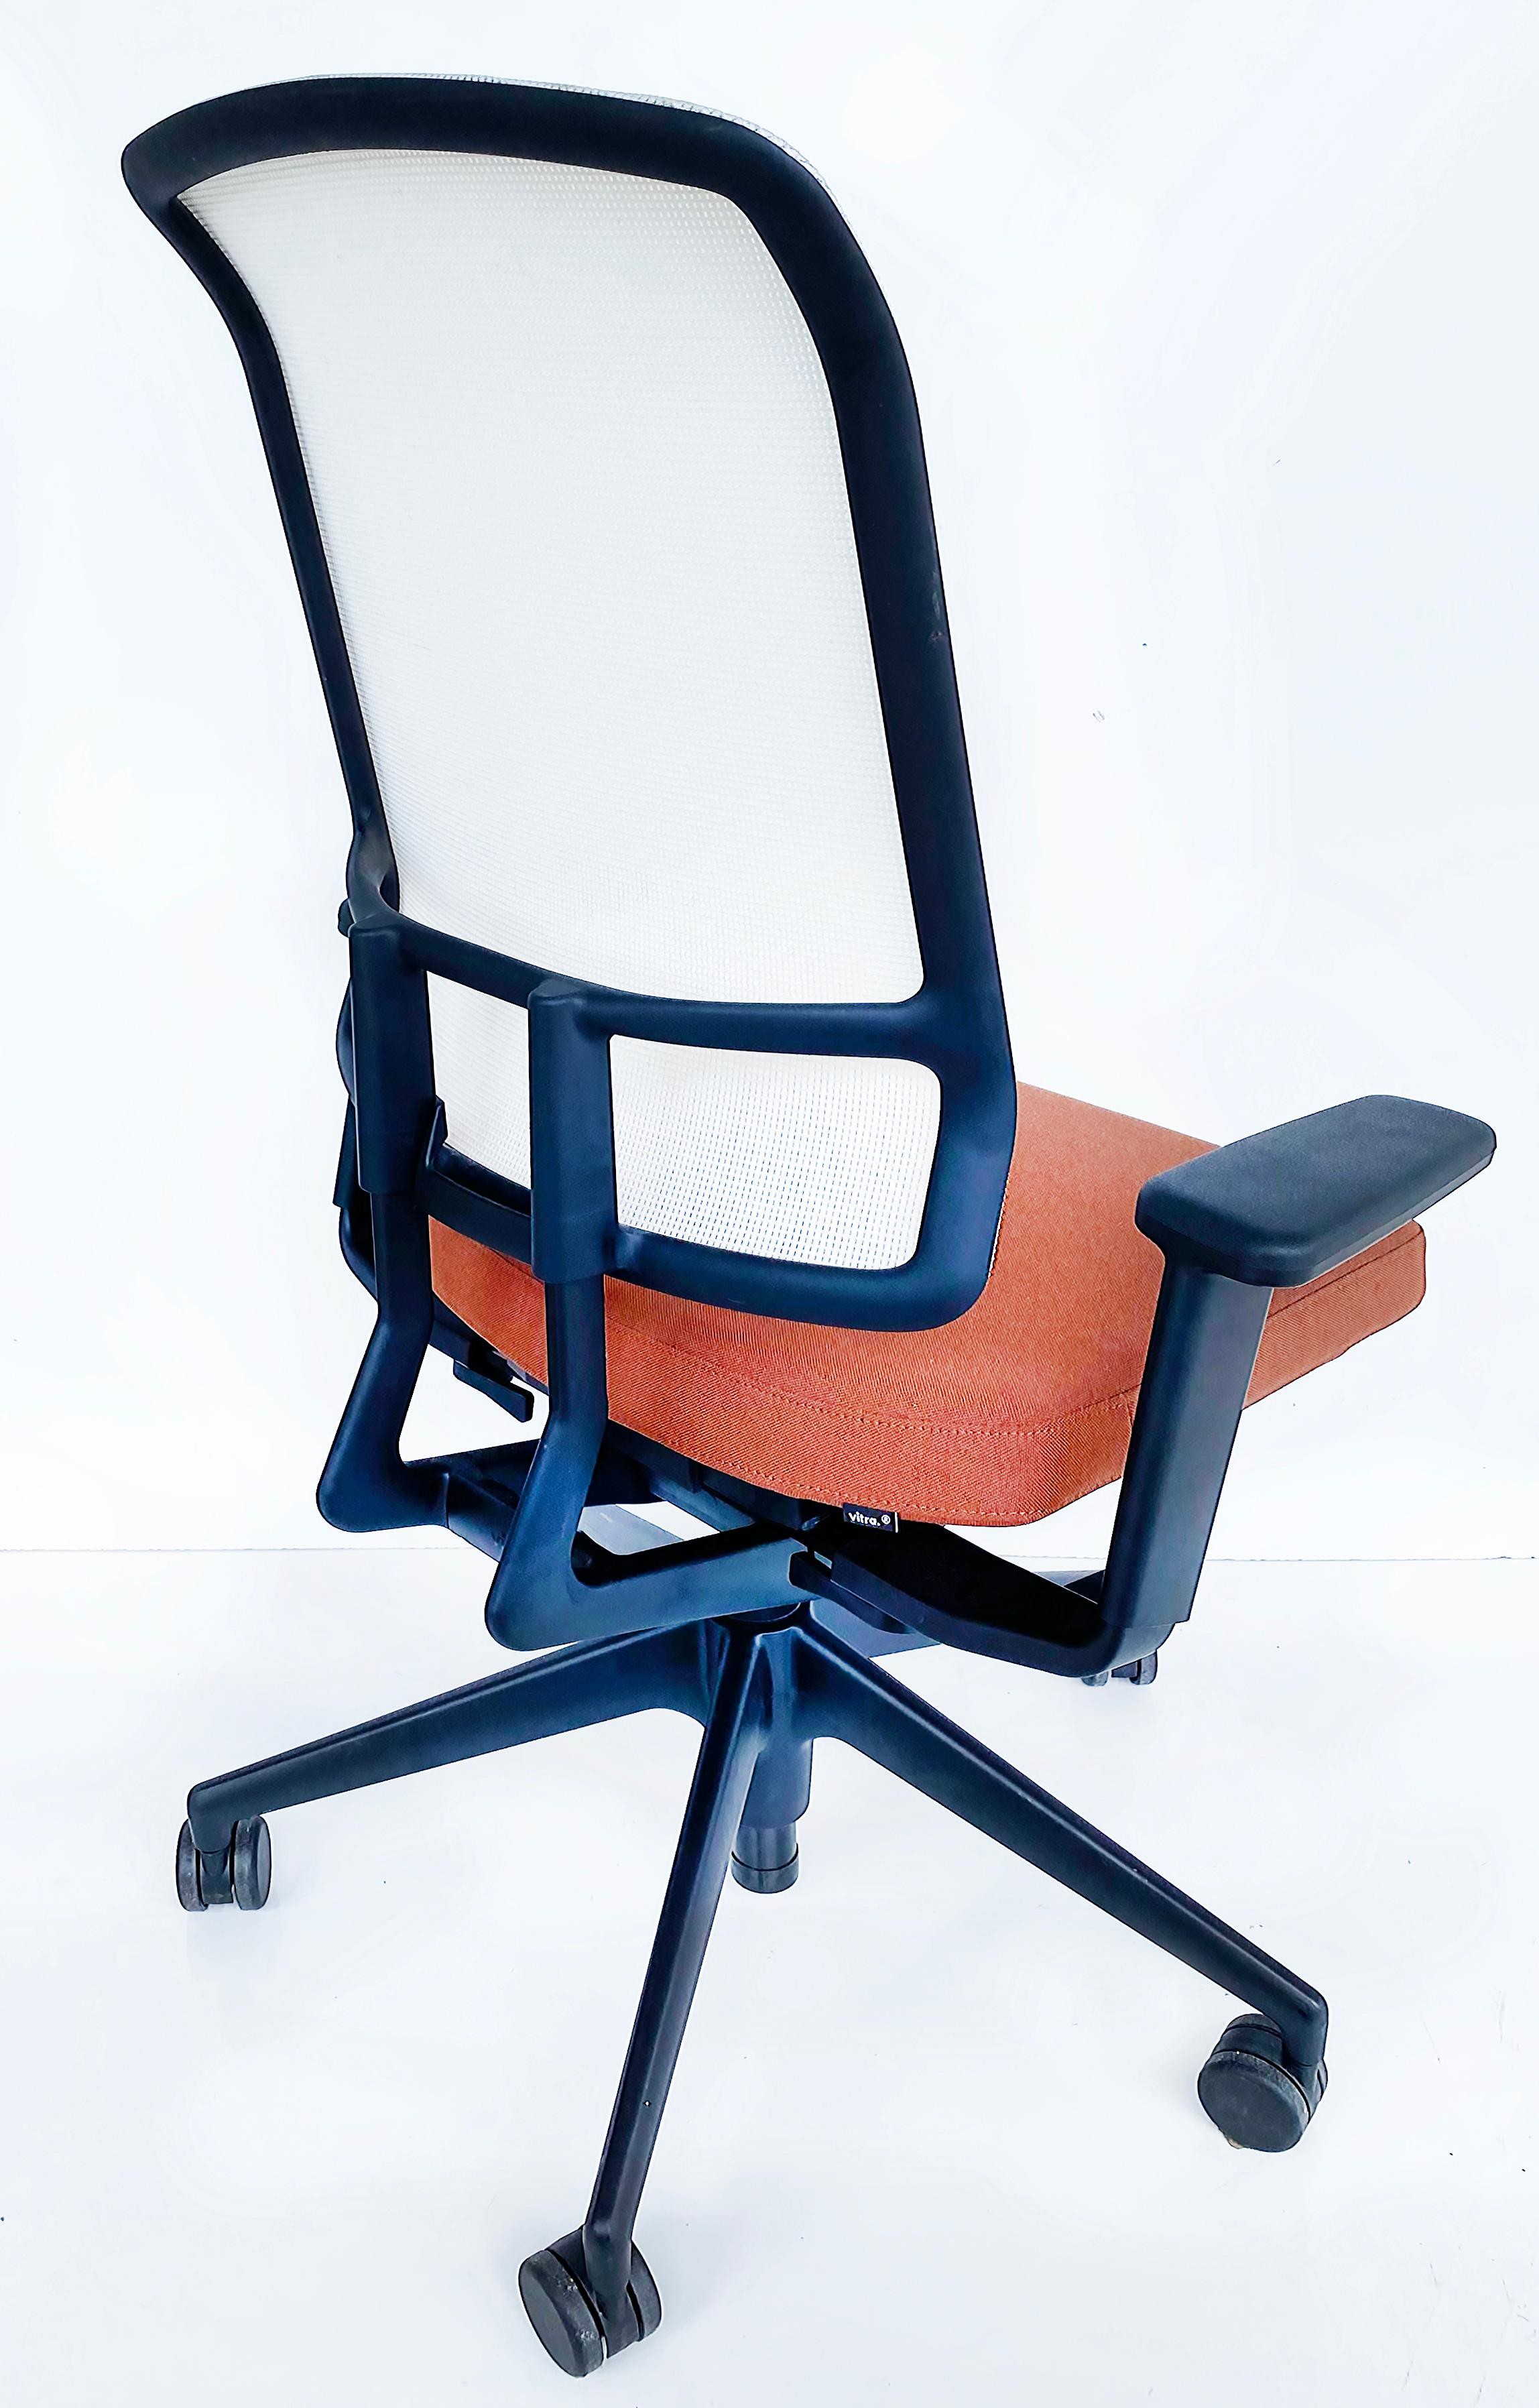 Vitra AM Fully Adjustable Ergonomic Office Chairs by Alberto Meda 2021 In Good Condition For Sale In Miami, FL